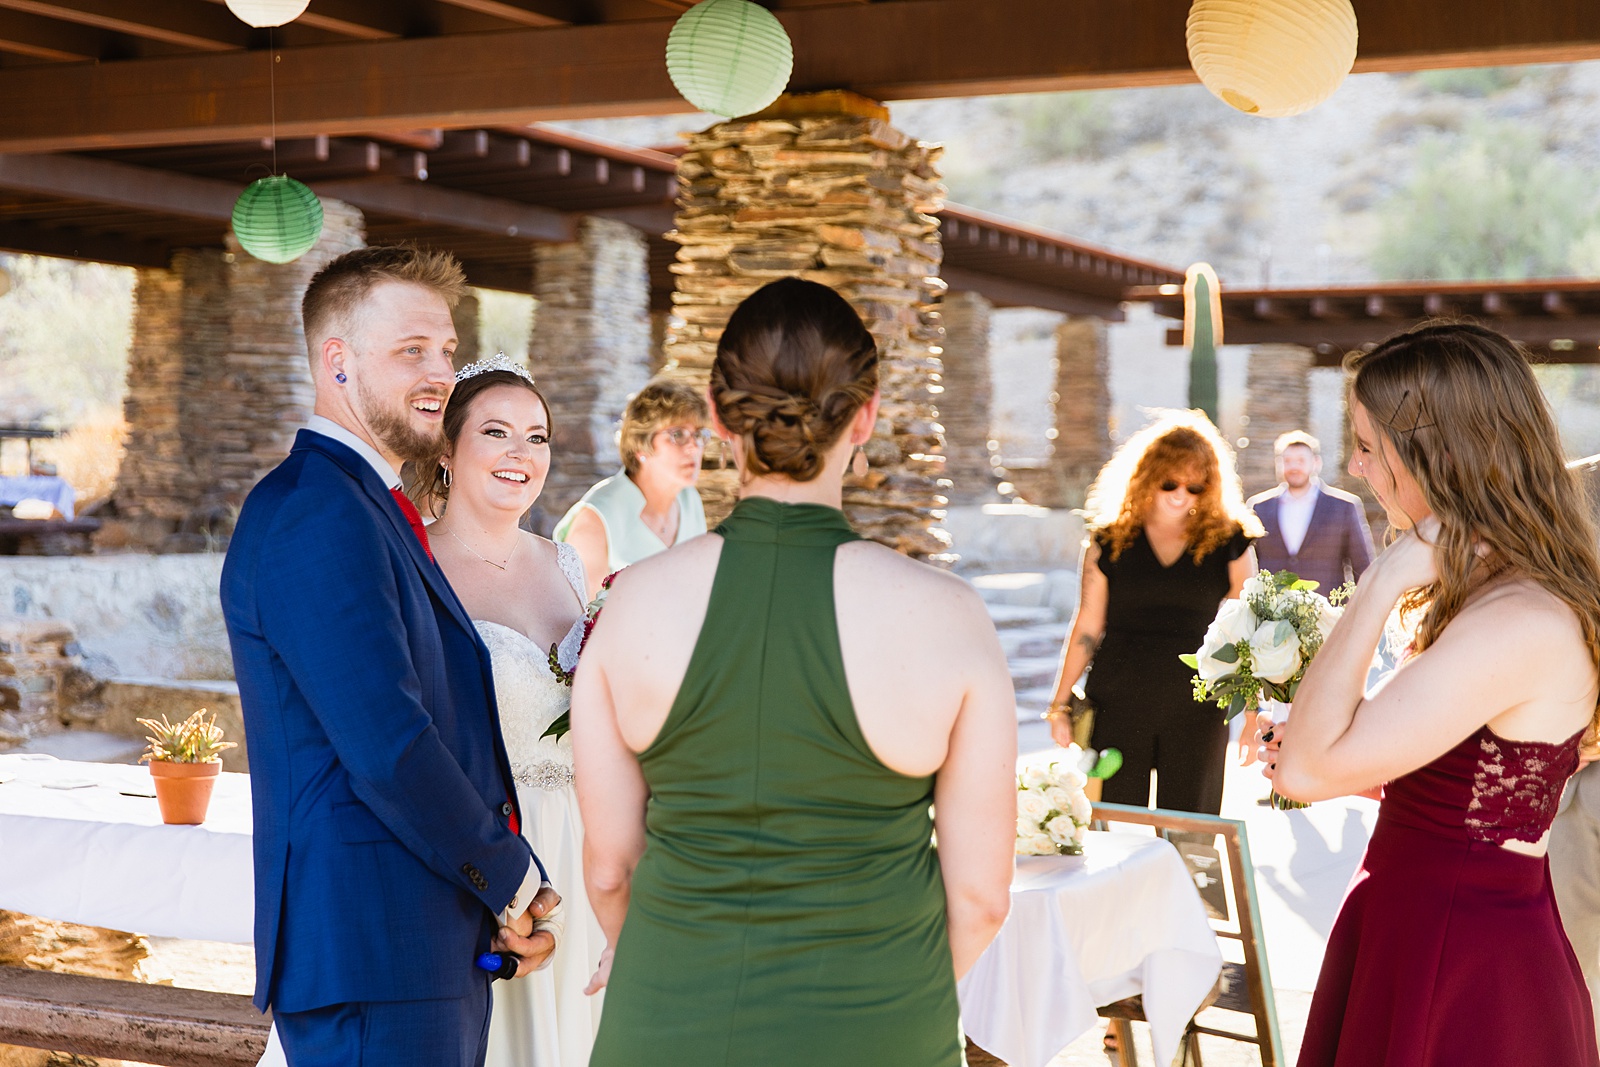 Bride and groom with guests at intimate desert wedding reception by Phoenix wedding photographer Juniper and Co Photography.